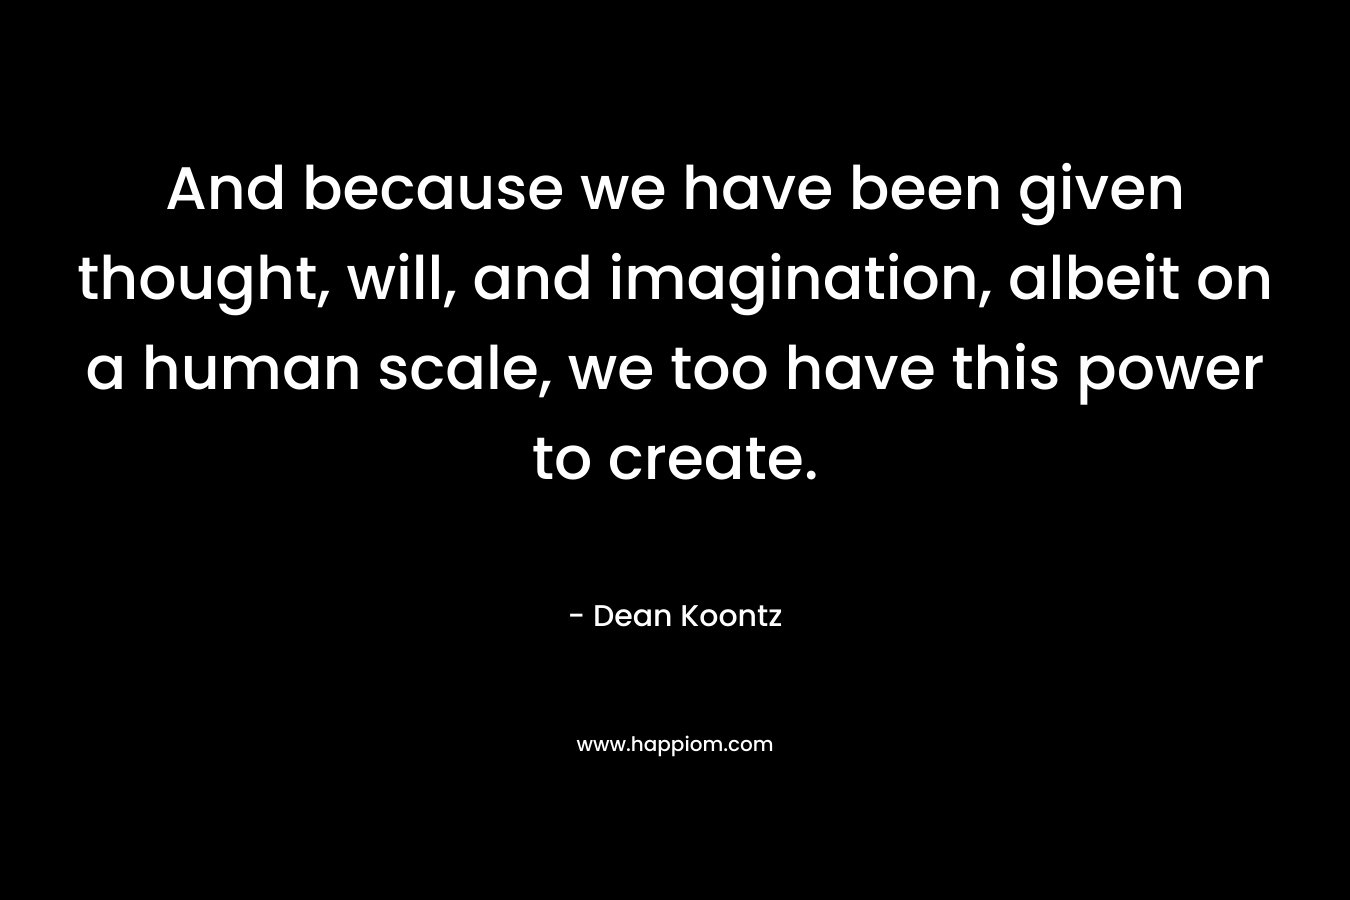 And because we have been given thought, will, and imagination, albeit on a human scale, we too have this power to create.